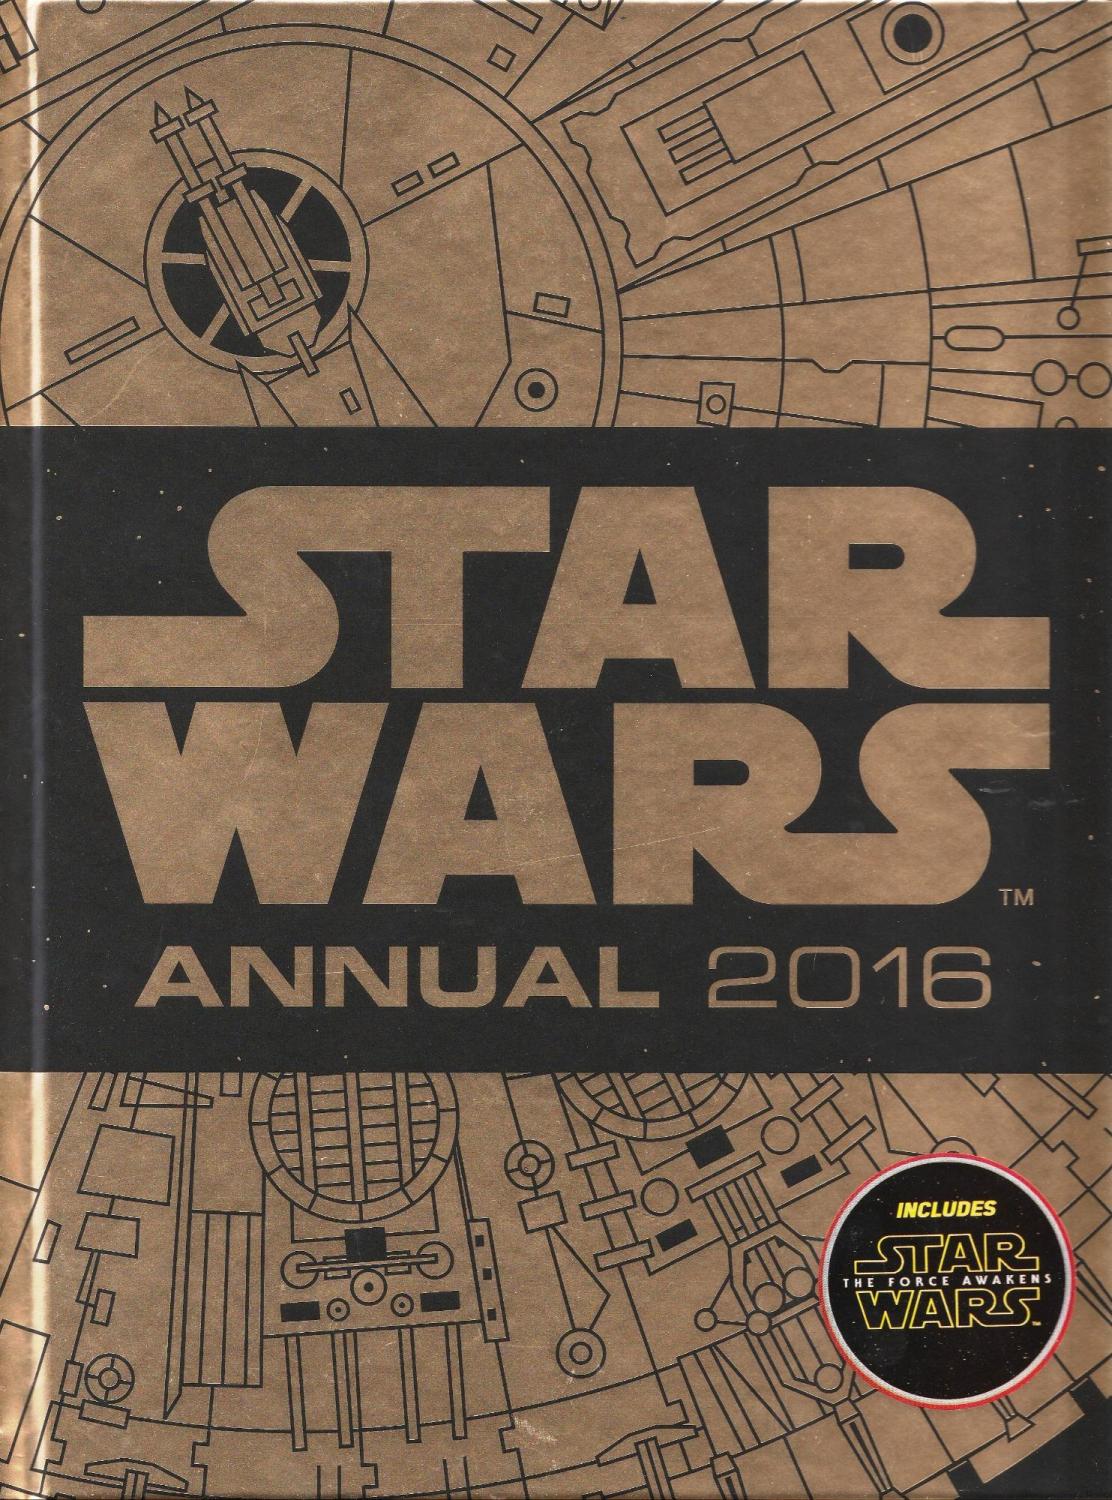 - Star Wars Annual 2016 (Includes The Force Awakens) - NEW